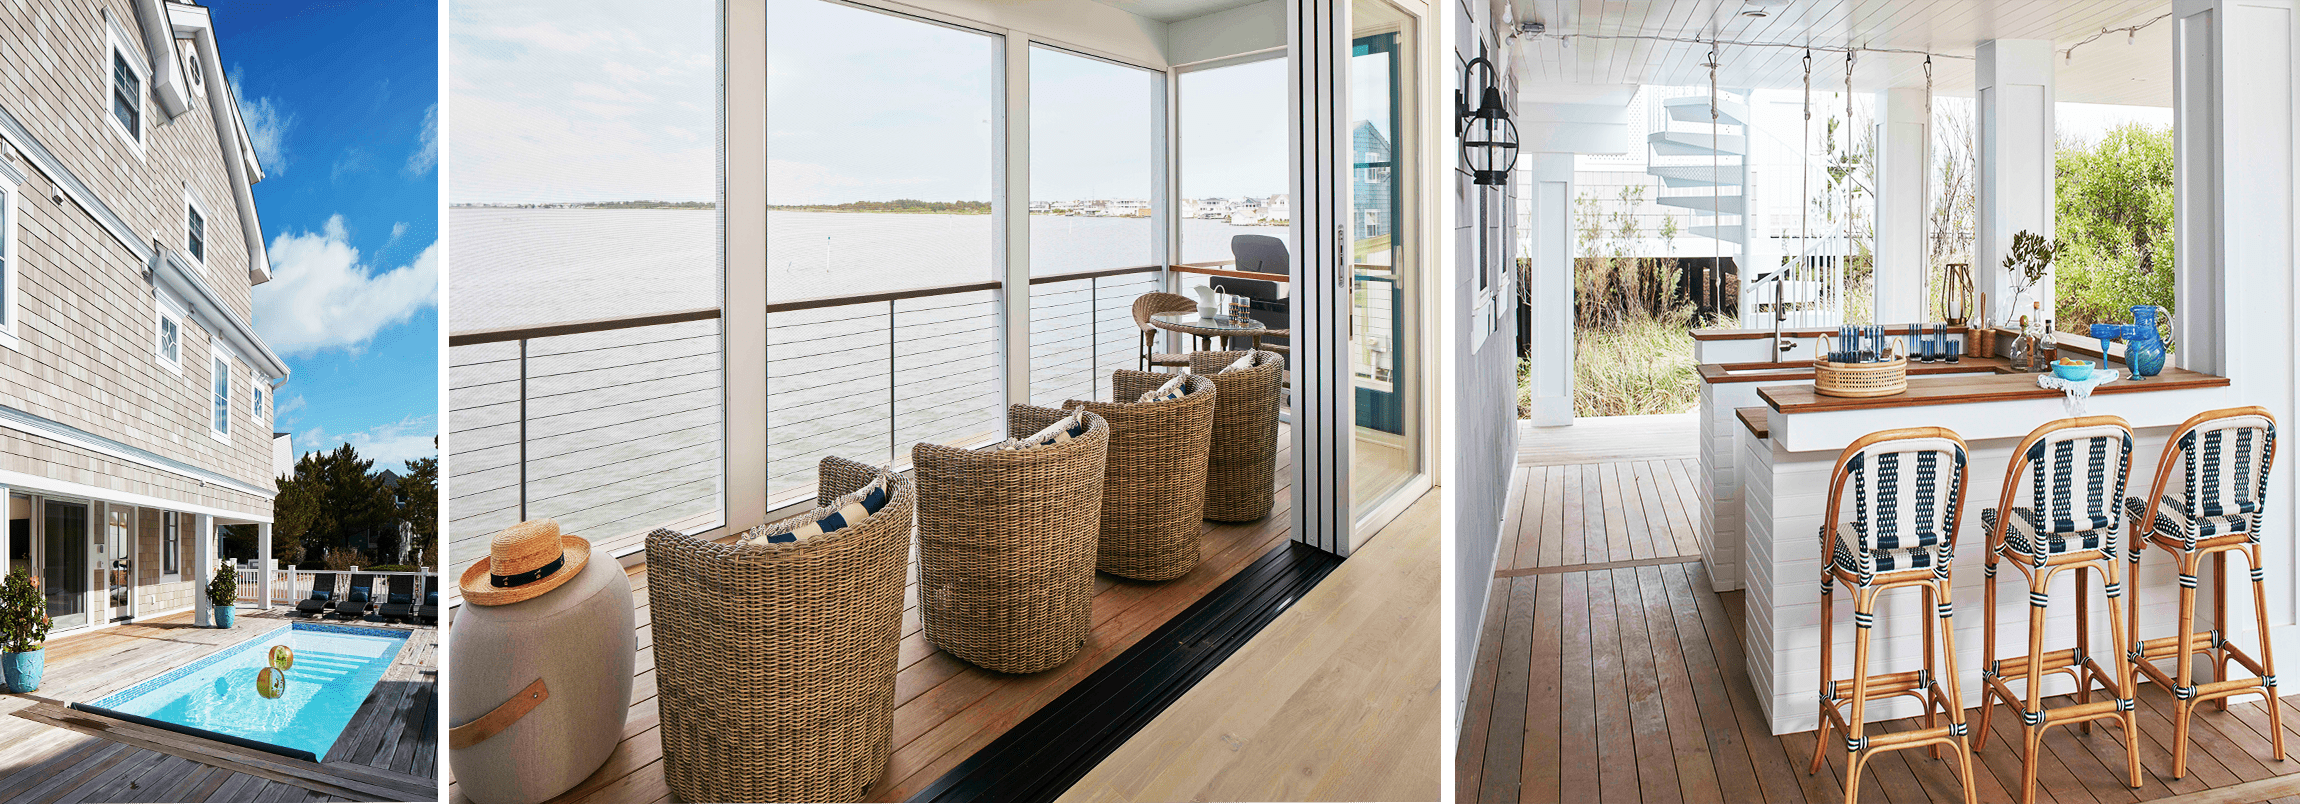 Our Most Popular Beach House Requests